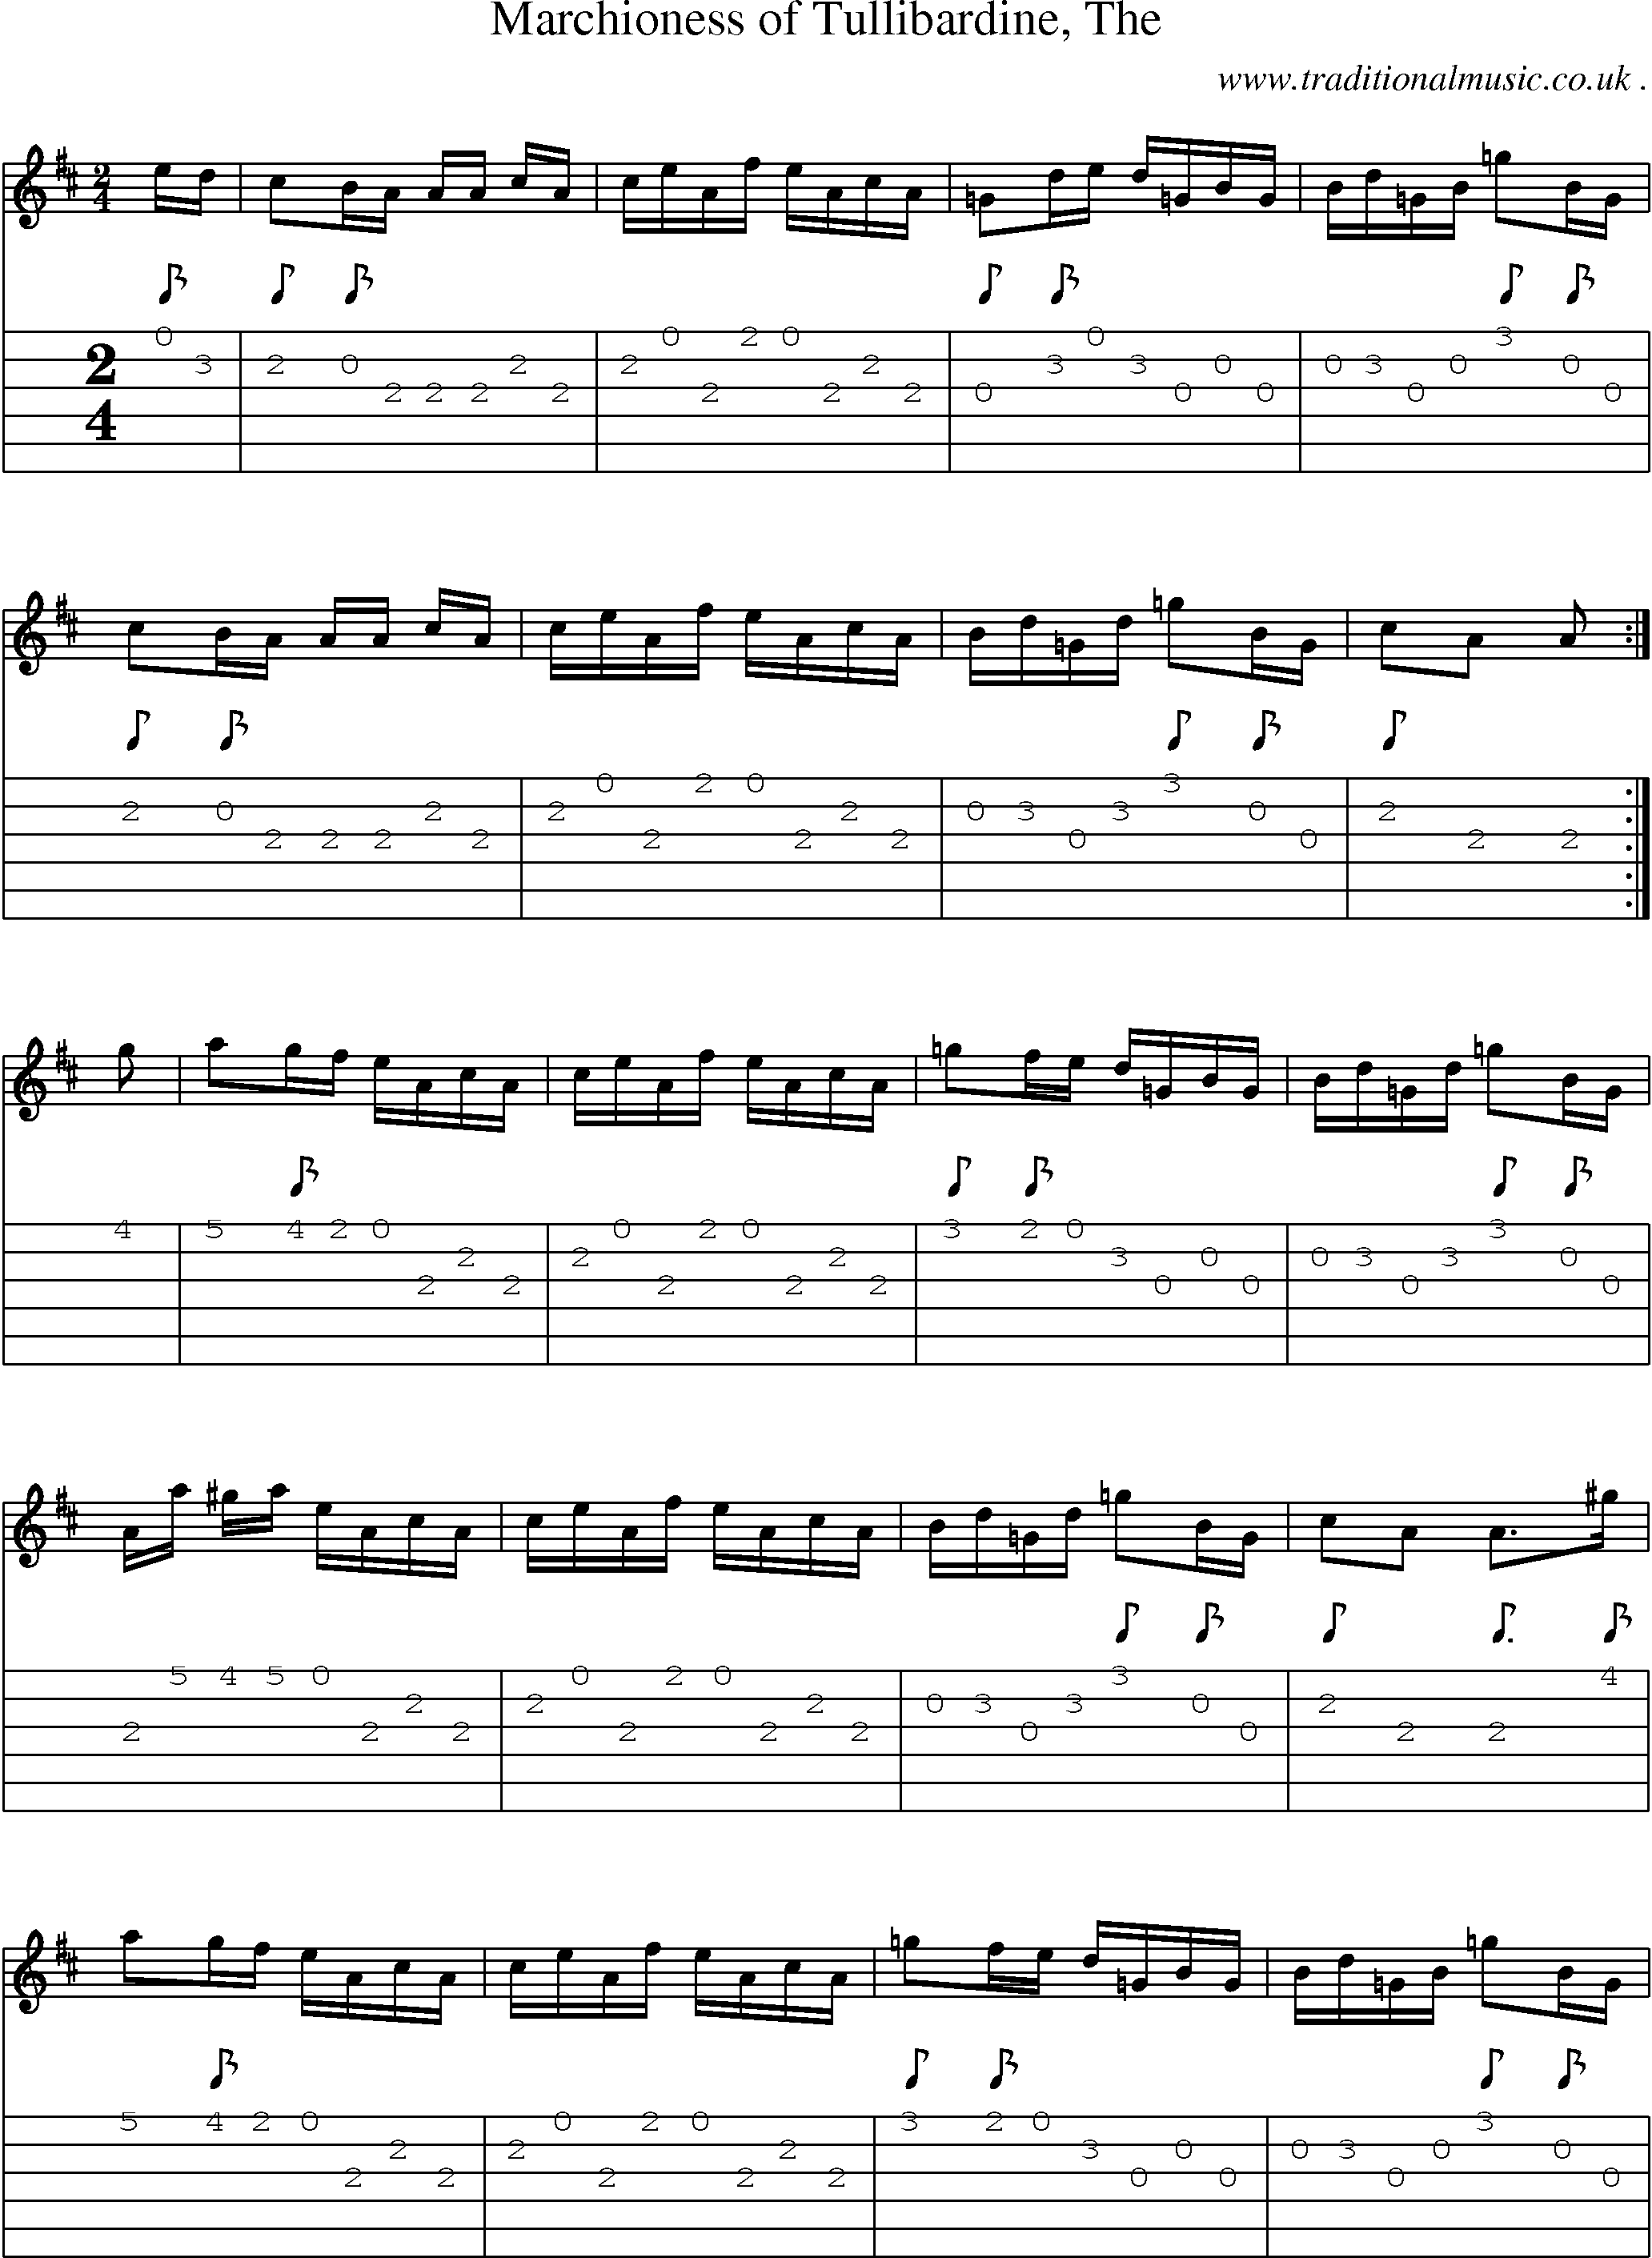 Sheet-music  score, Chords and Guitar Tabs for Marchioness Of Tullibardine The